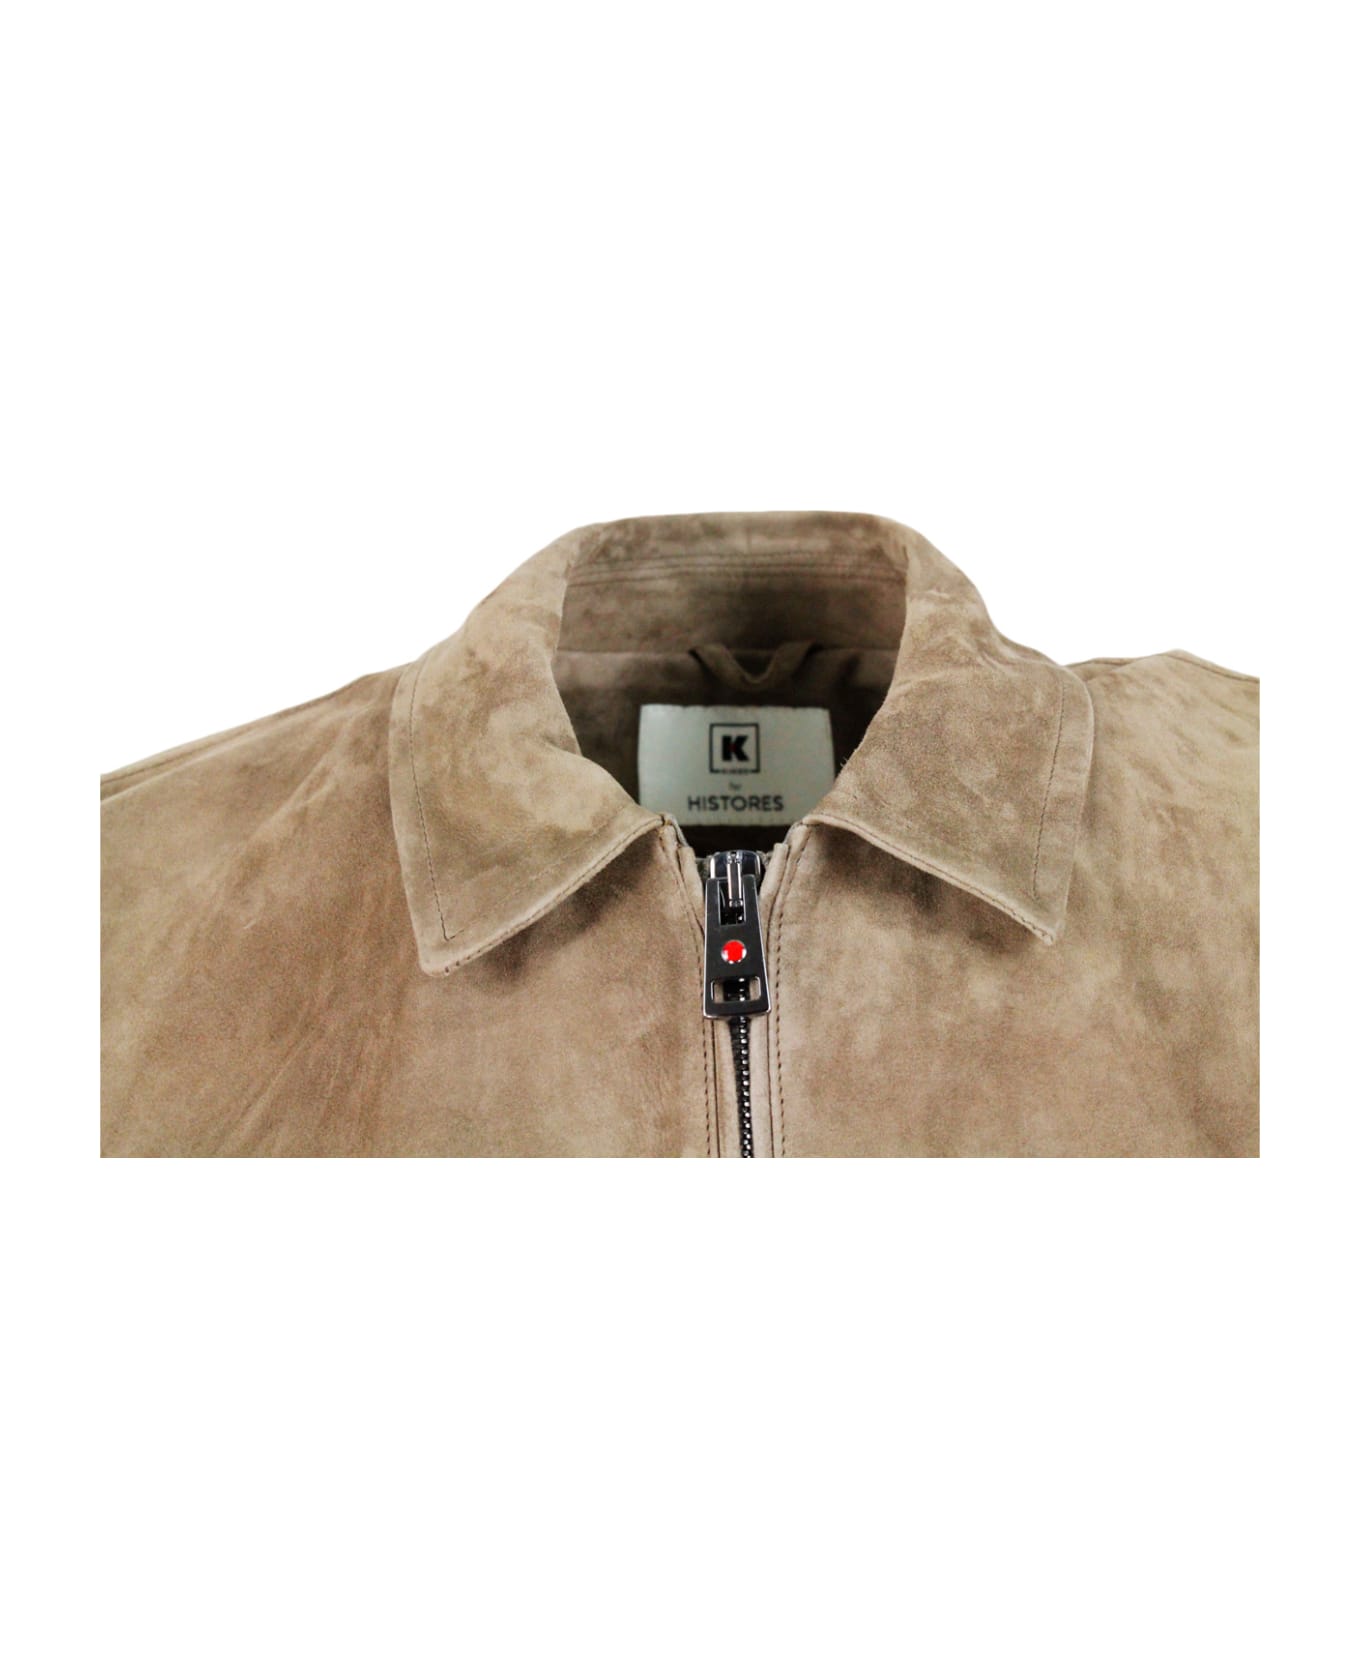 Kired Lightweight Unlined Jacket In Very Soft Suede With Shirt Collar And Zip Closure - Beige - dove 